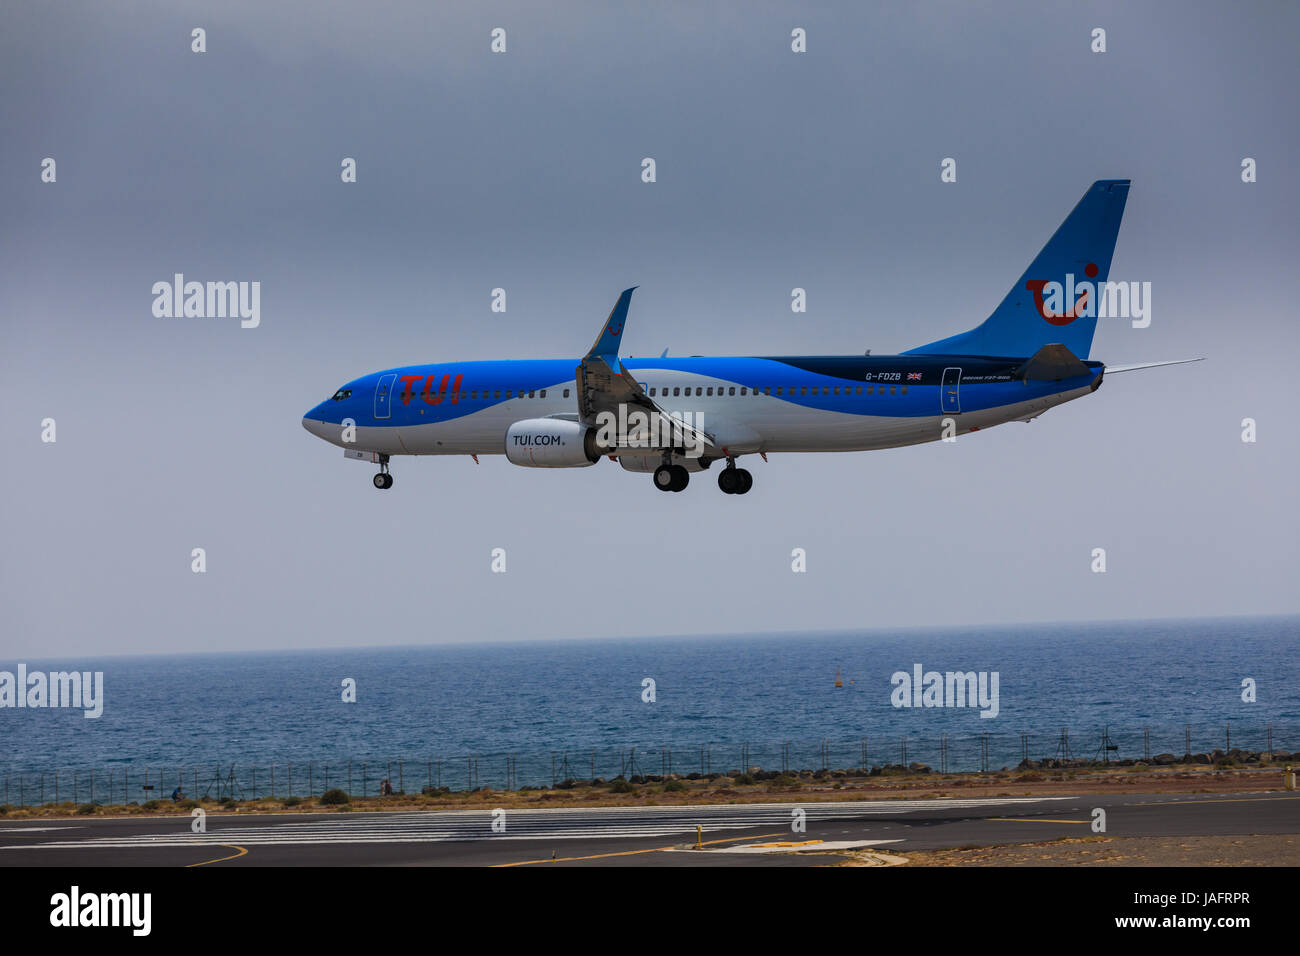 ARECIFE, SPAIN - APRIL, 16 2017: Boeing 737-800 of TUI with the registration G-FDZB landing at Lanzarote Airport Stock Photo